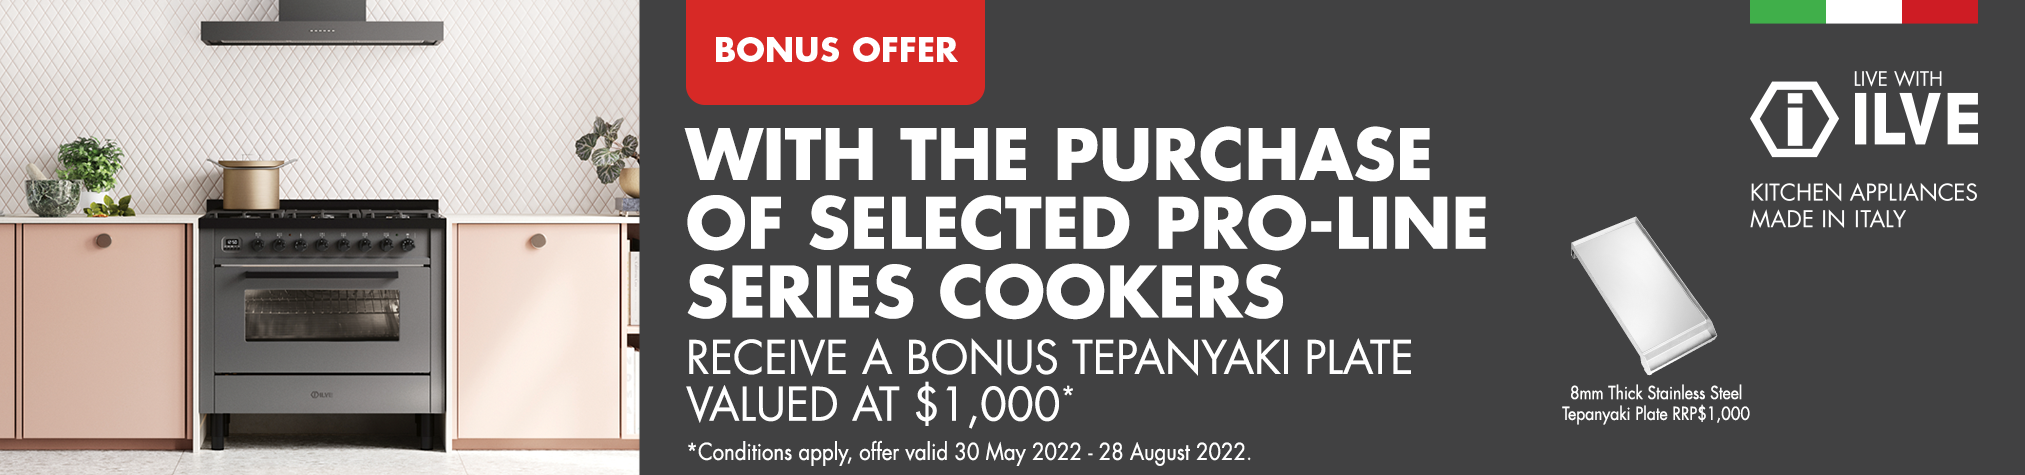 Bonus Teppanyaki Plate with selected Ilve Pro-Line Series Cookers